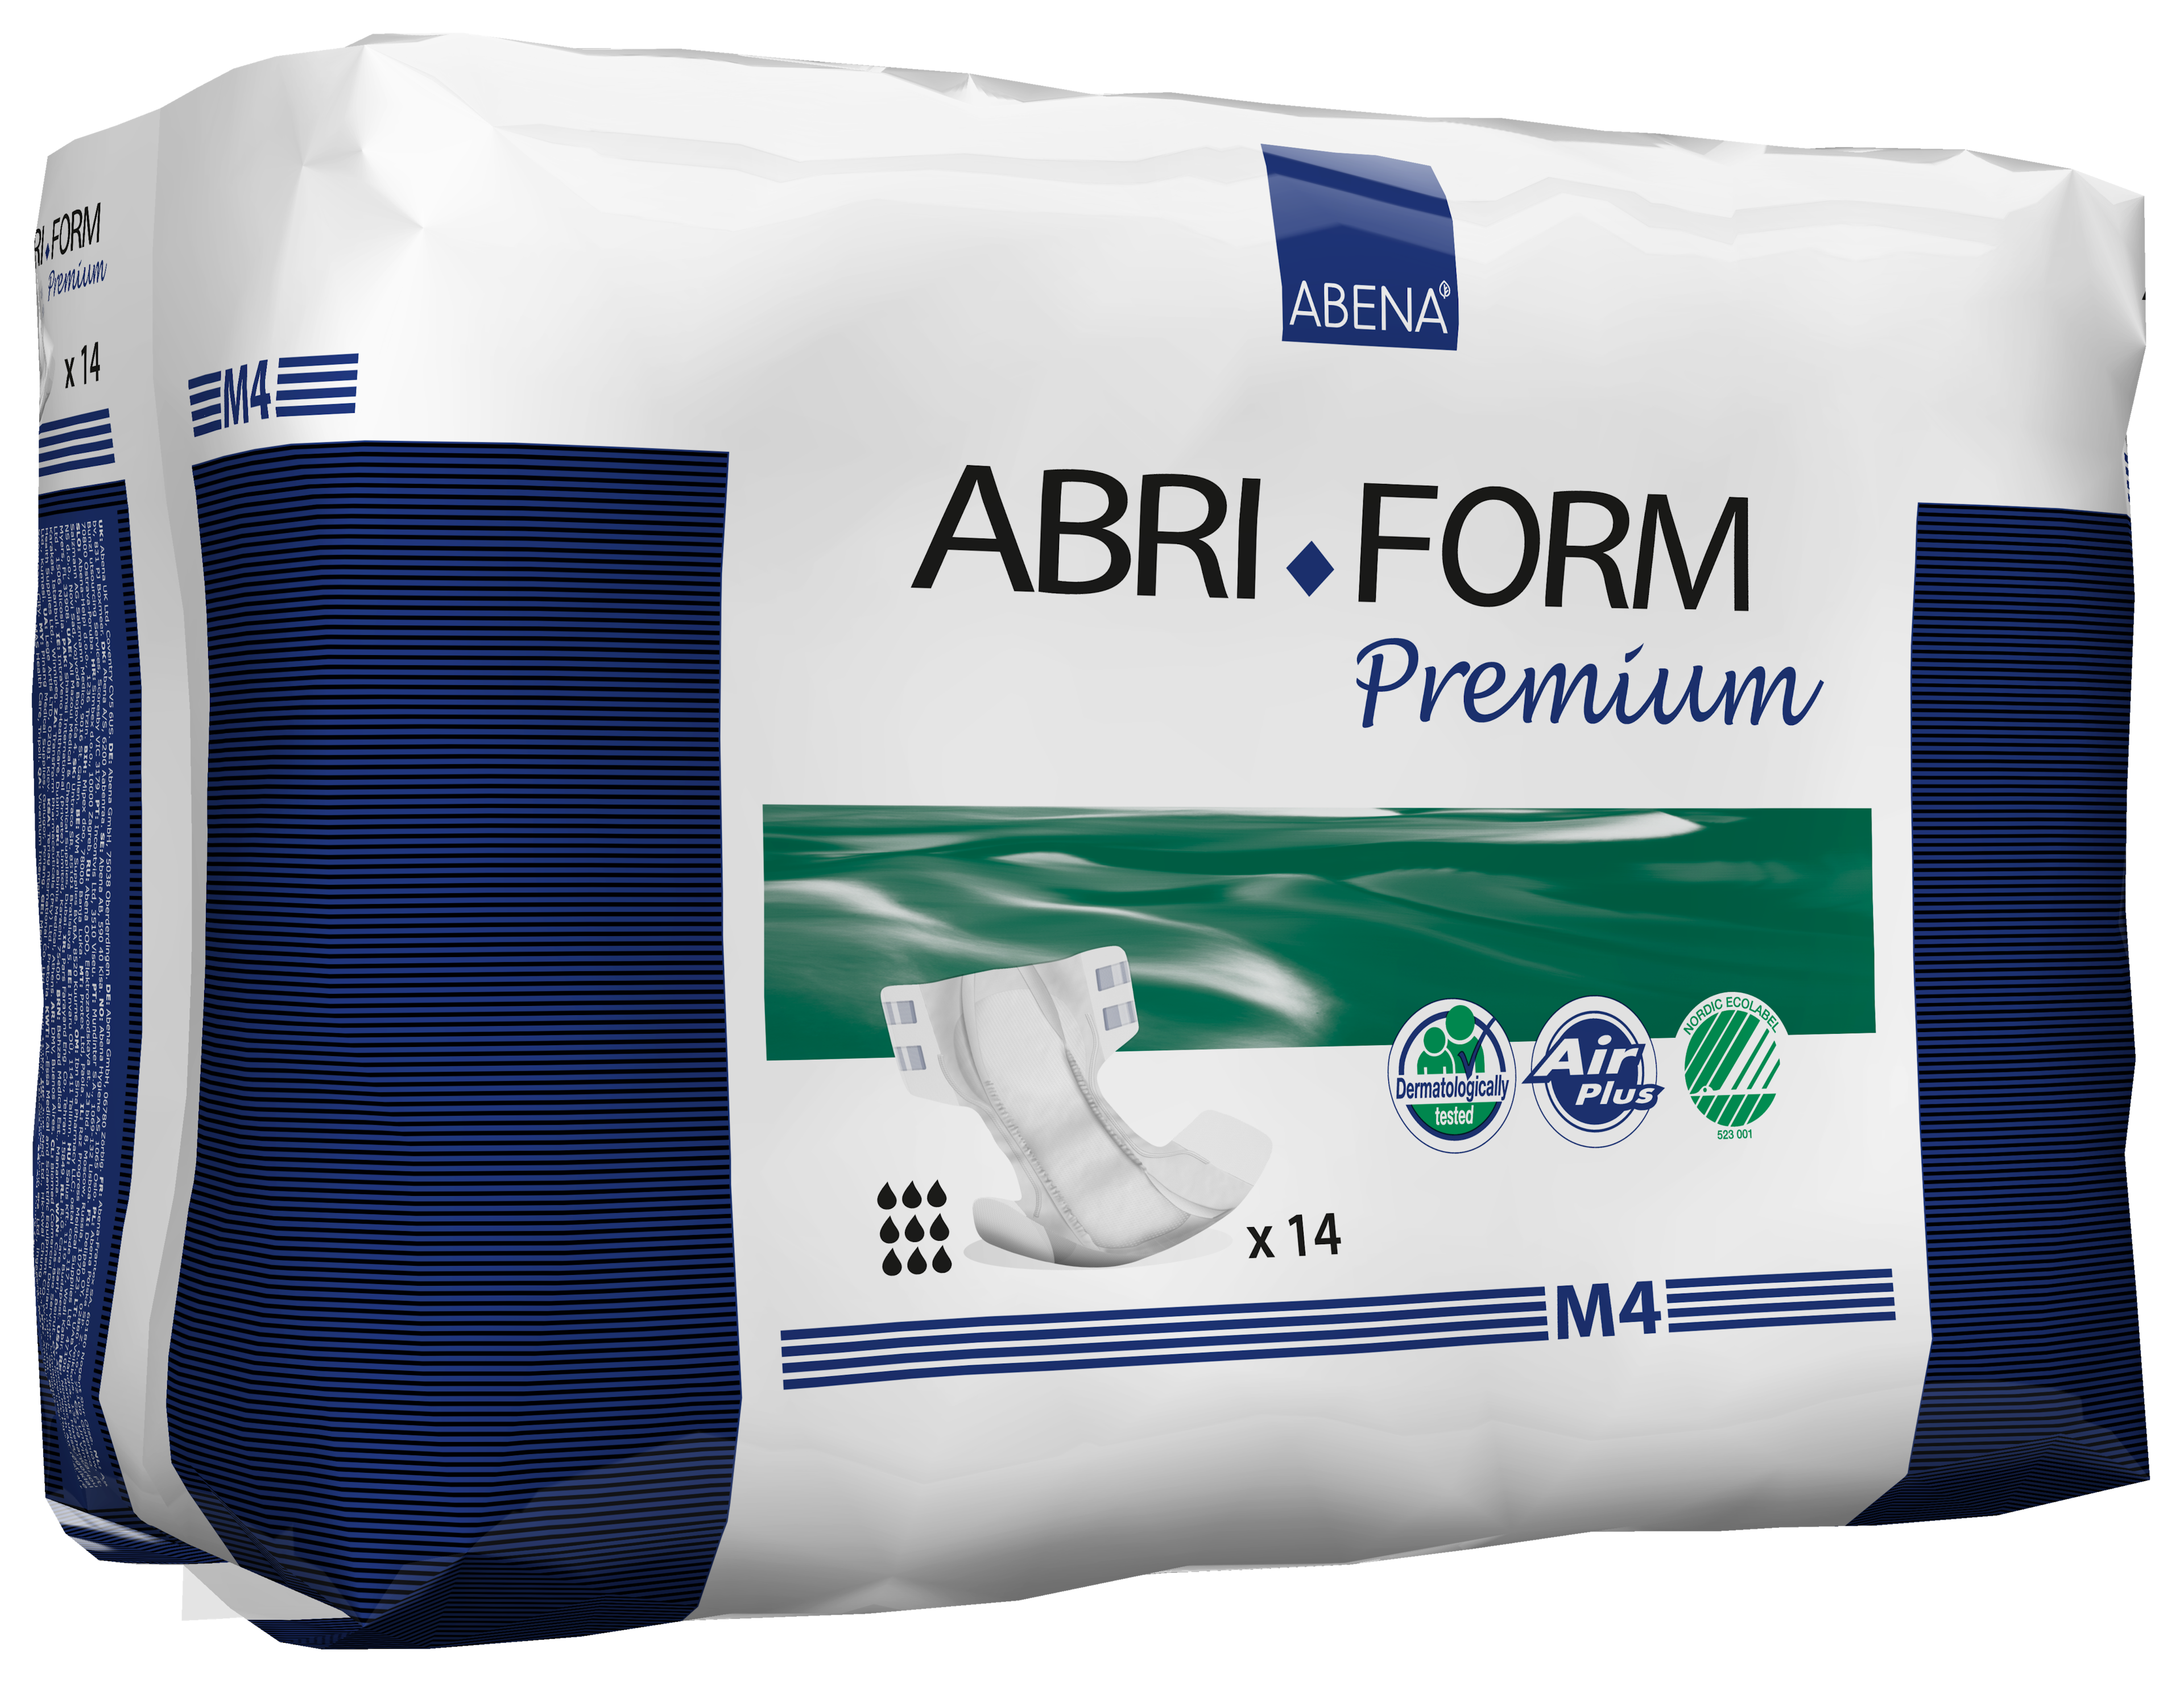 Abena Abri-Form Premium Adult Diapers with Tabs, M4